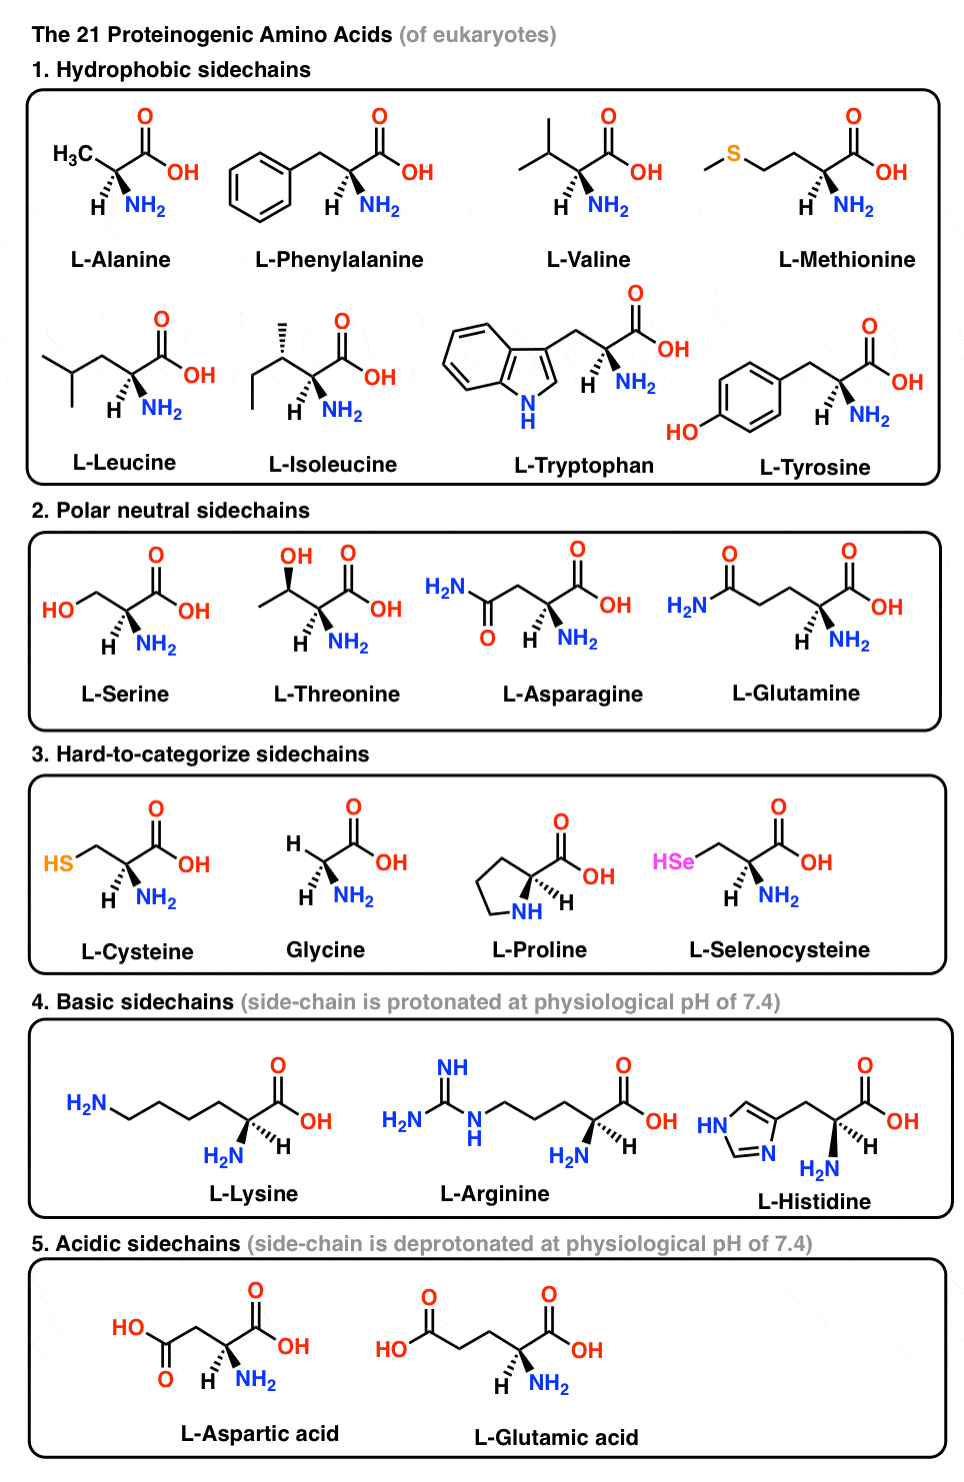 table of all 21 proteinogenic amino acids arranged by sidechains